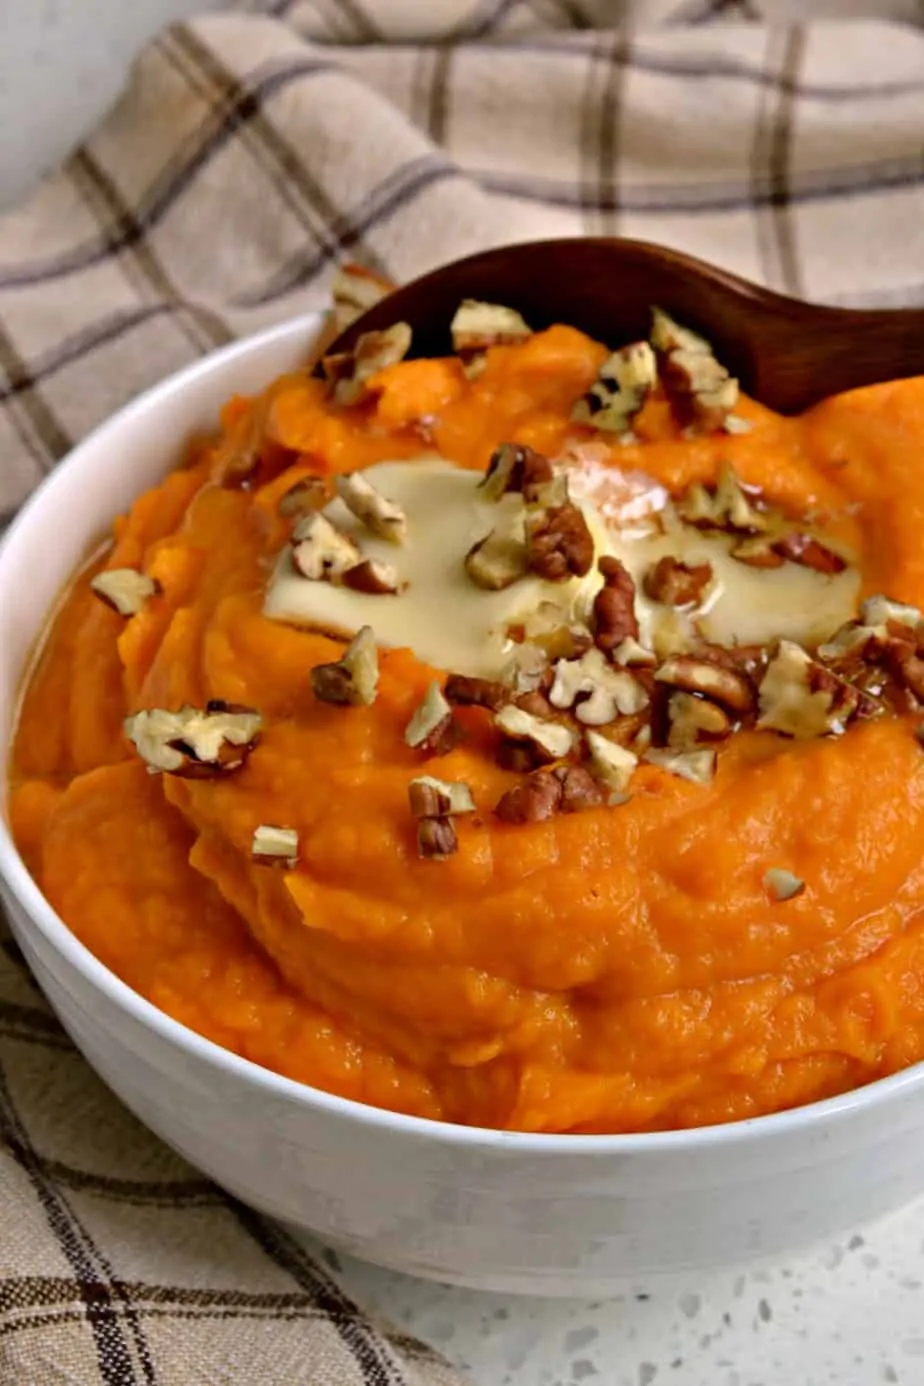 These delectable six ingredient Mashed Sweet Potatoes are so incredibly creamy with just a touch of sweetness.